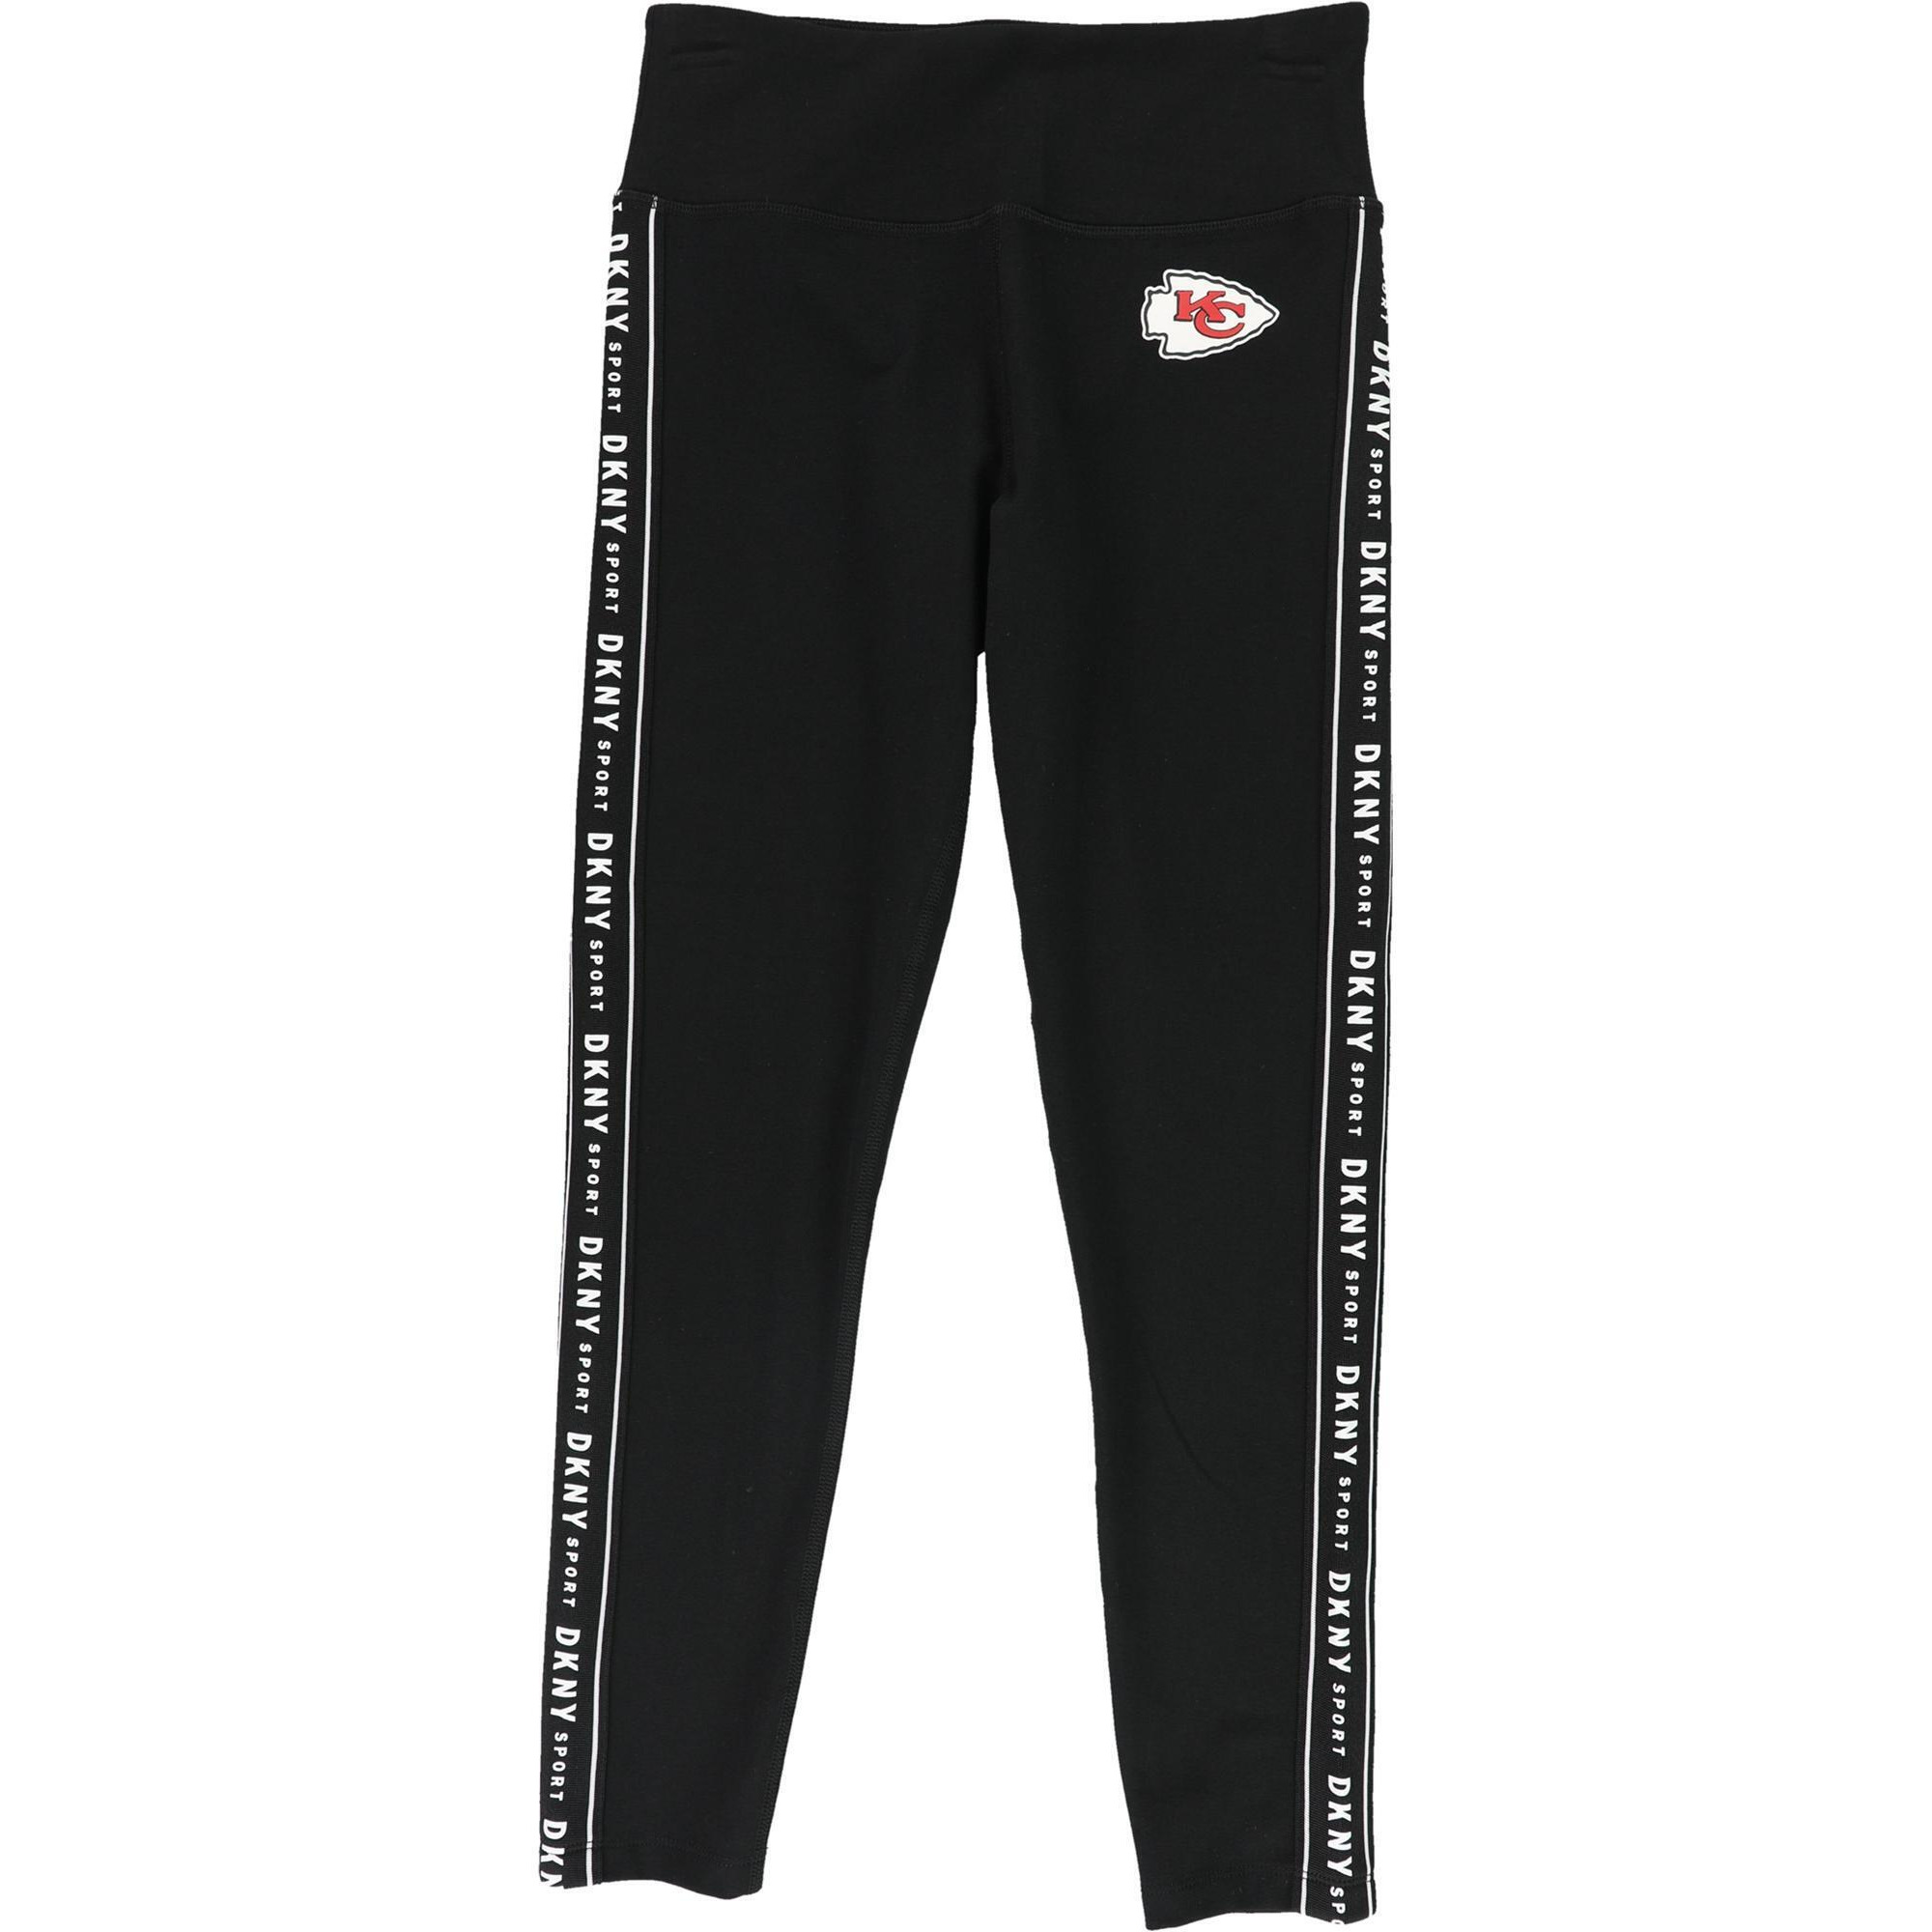 DKNY Womens Kansas City Chiefs Compression Athletic Pants, Style # DS00Z099 alternate image